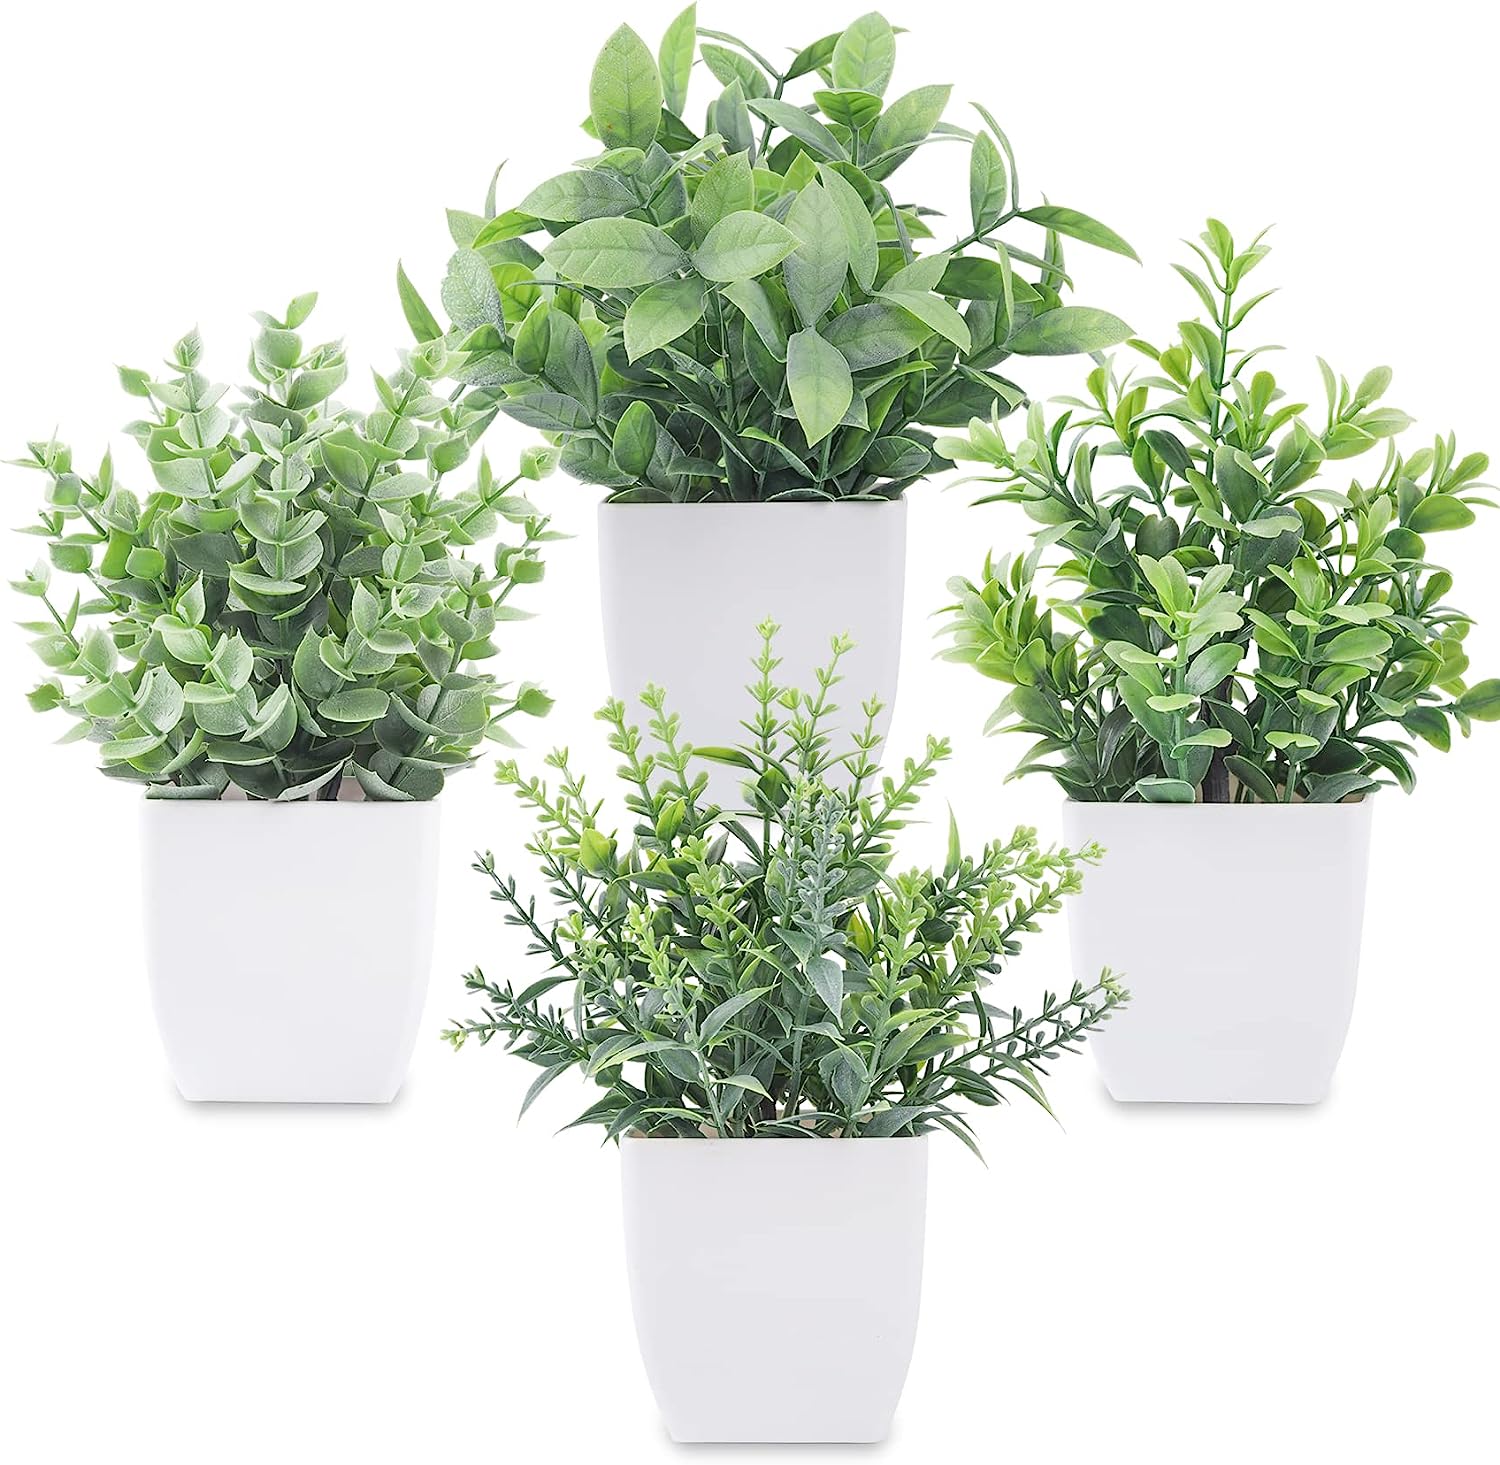 Der Rose 4 Packs Fake Plants Mini Artificial Greenery Potted Plants for Home Decor Indoor Office Table Room Farmhouse - UK GEMS